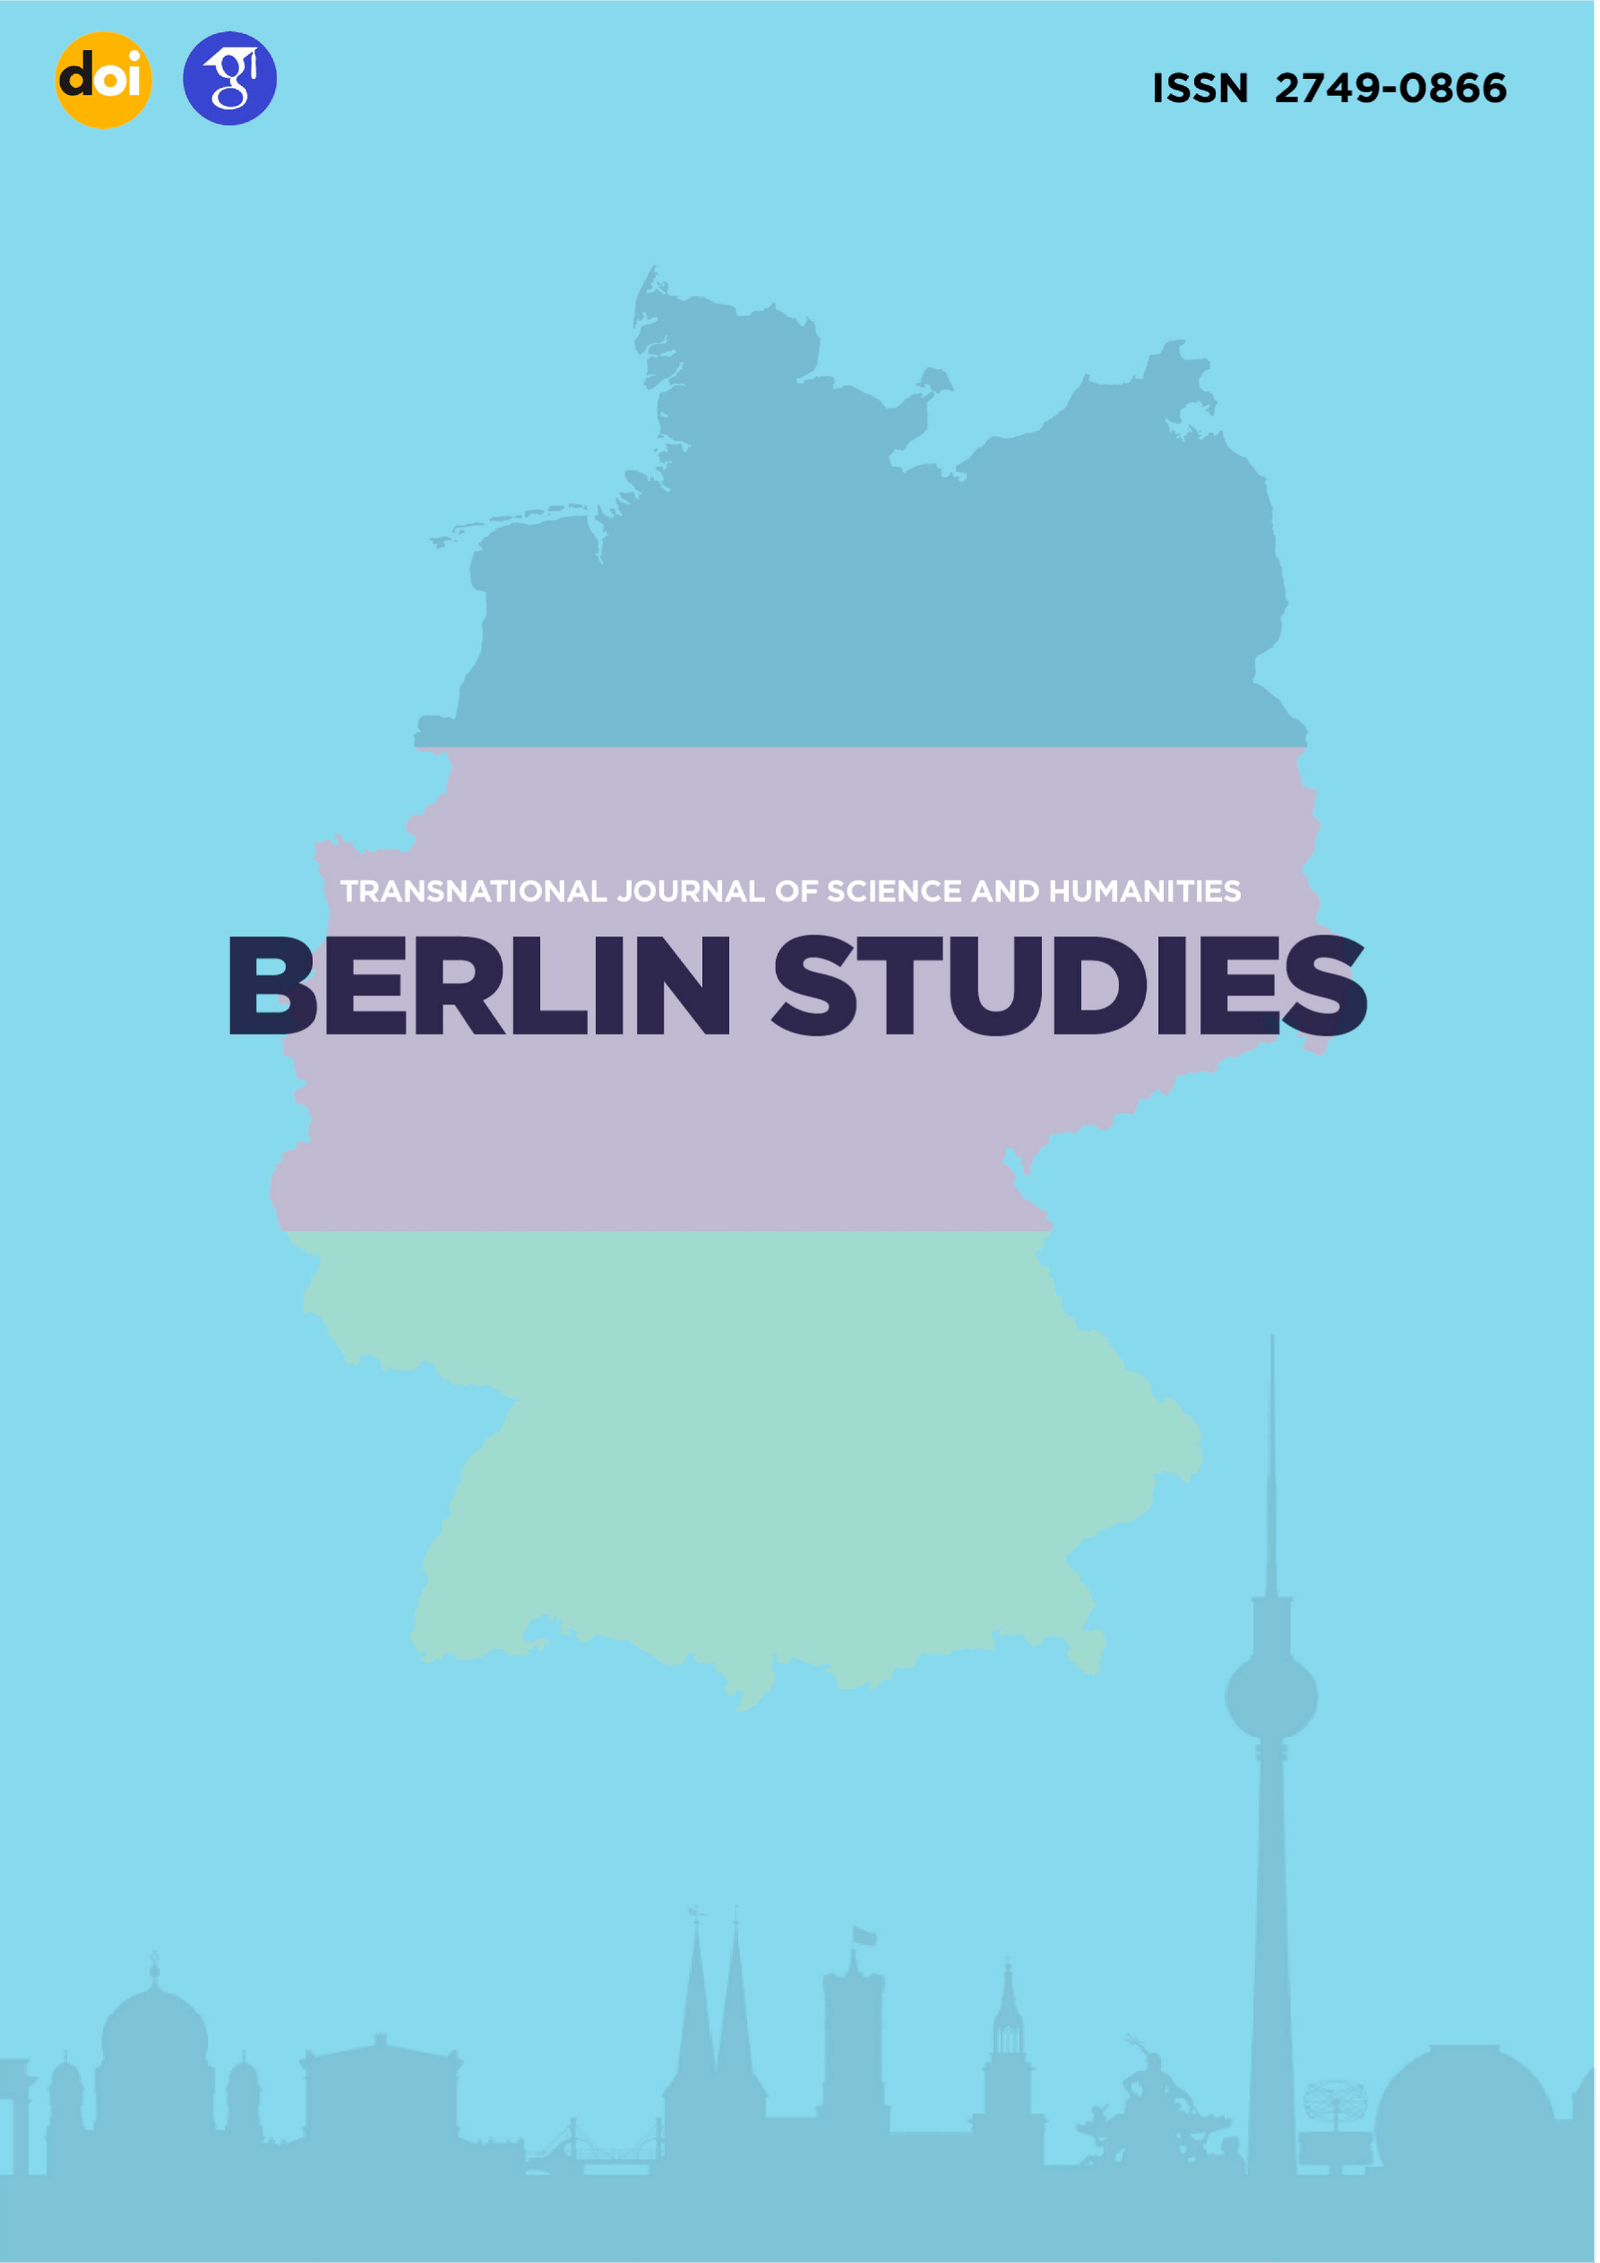 					View Vol. 2 No. 1.9 Psychological sciences (2022): Berlin Studies Transnational Journal of Science and Humanities
				